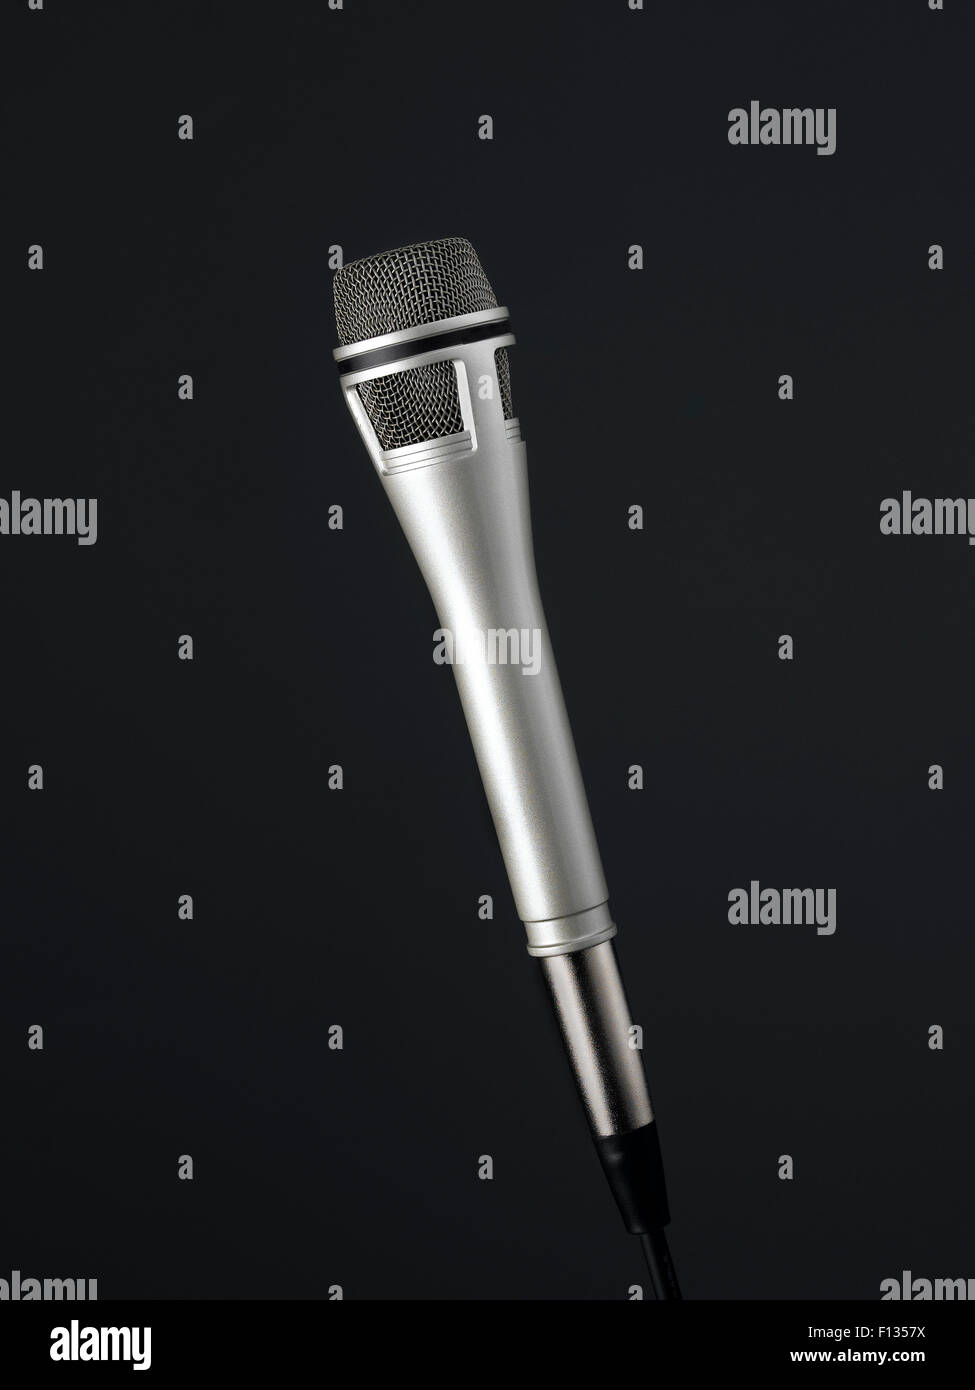 Microphone with a black background Stock Photo